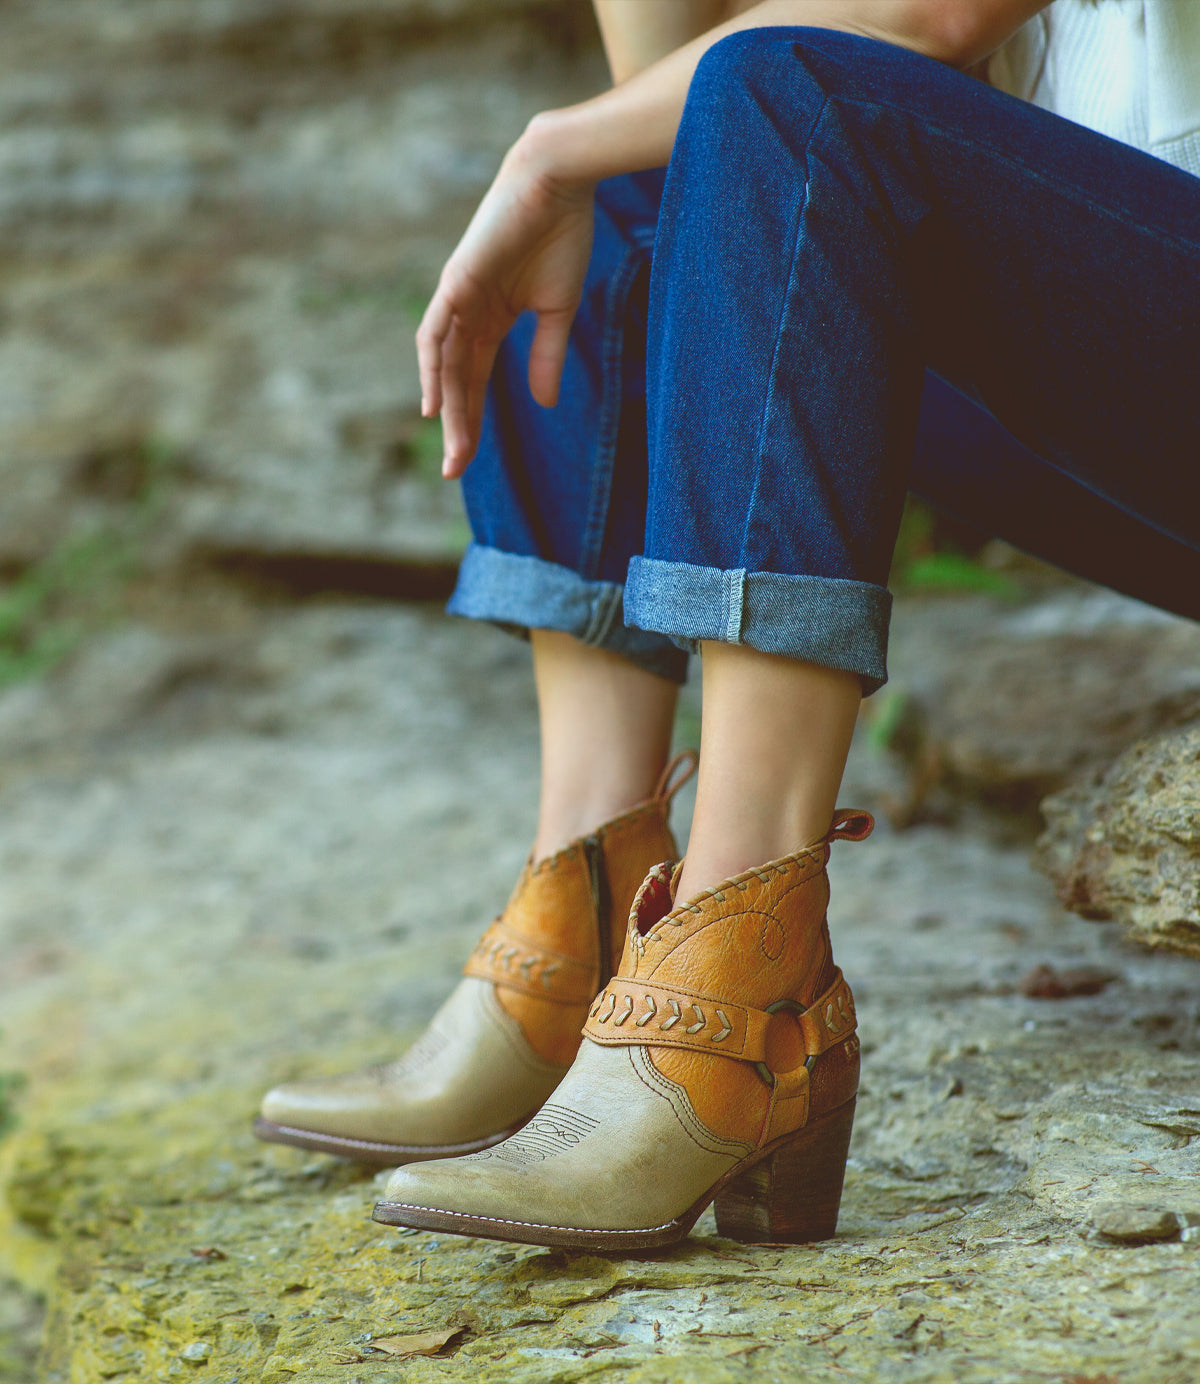 A woman wearing Tania jeans and Bed Stu cowboy boots sitting on a rock.